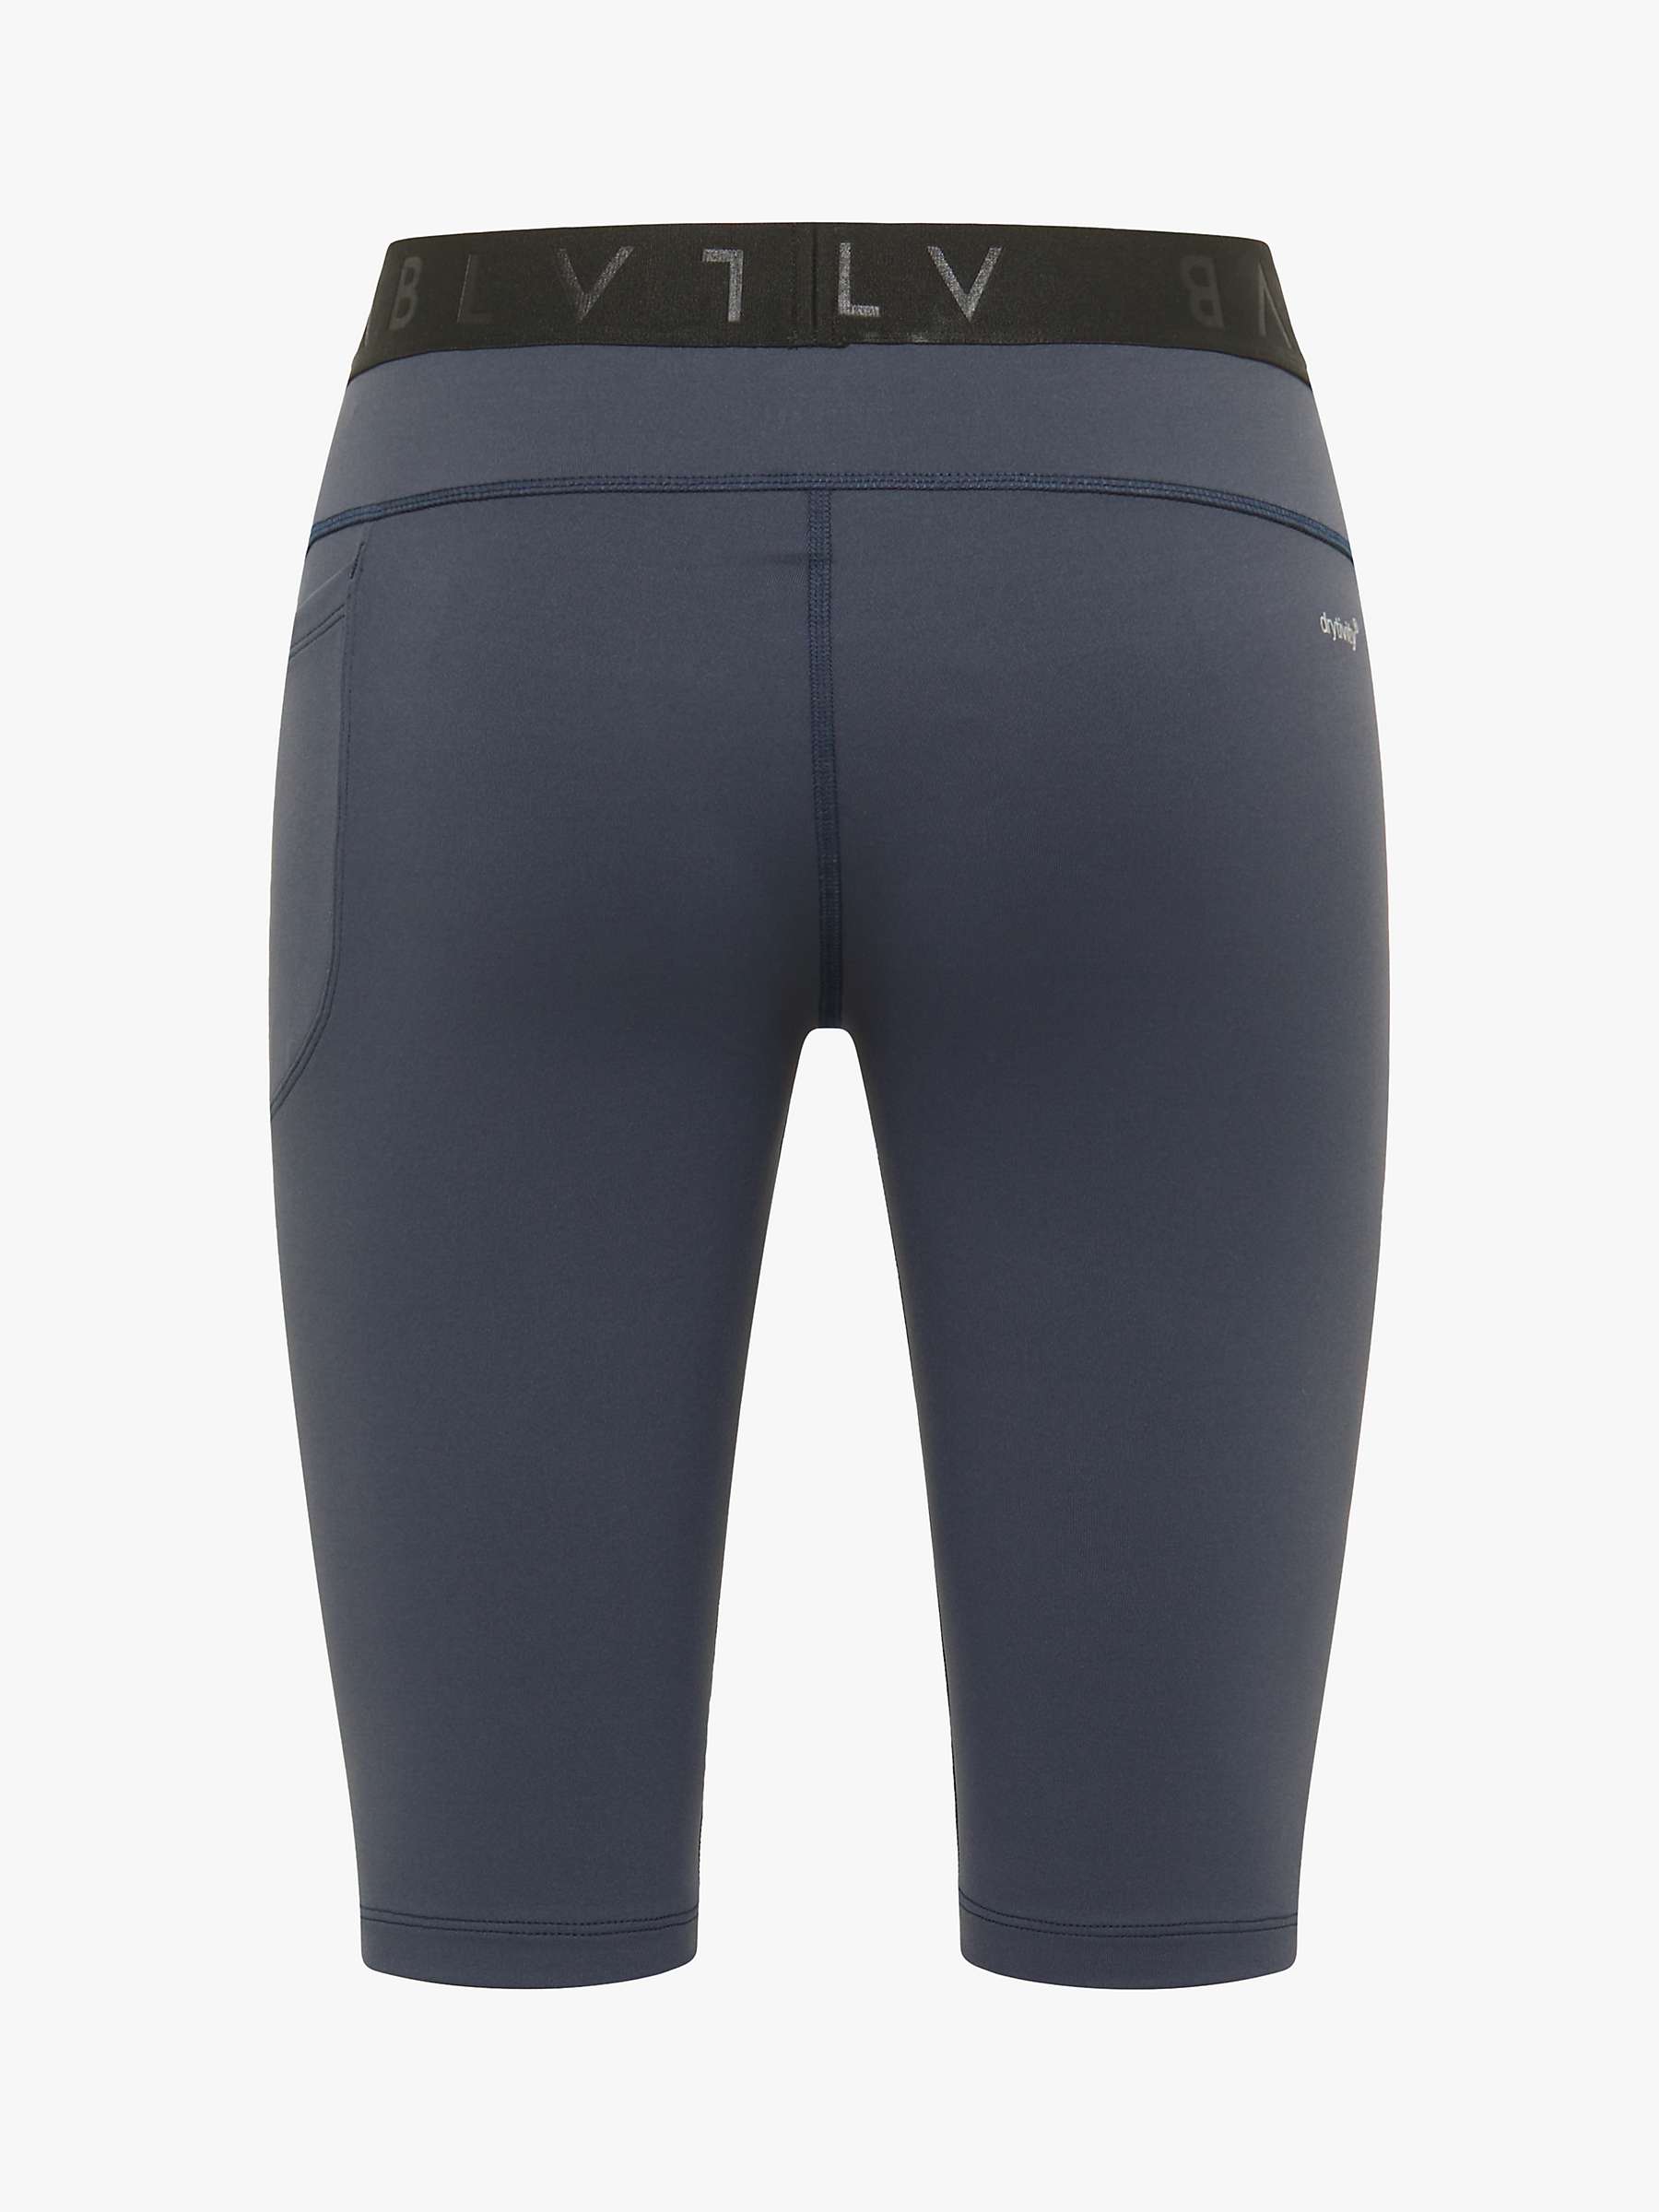 Buy Venice Beach Ally Cycling Shorts Online at johnlewis.com